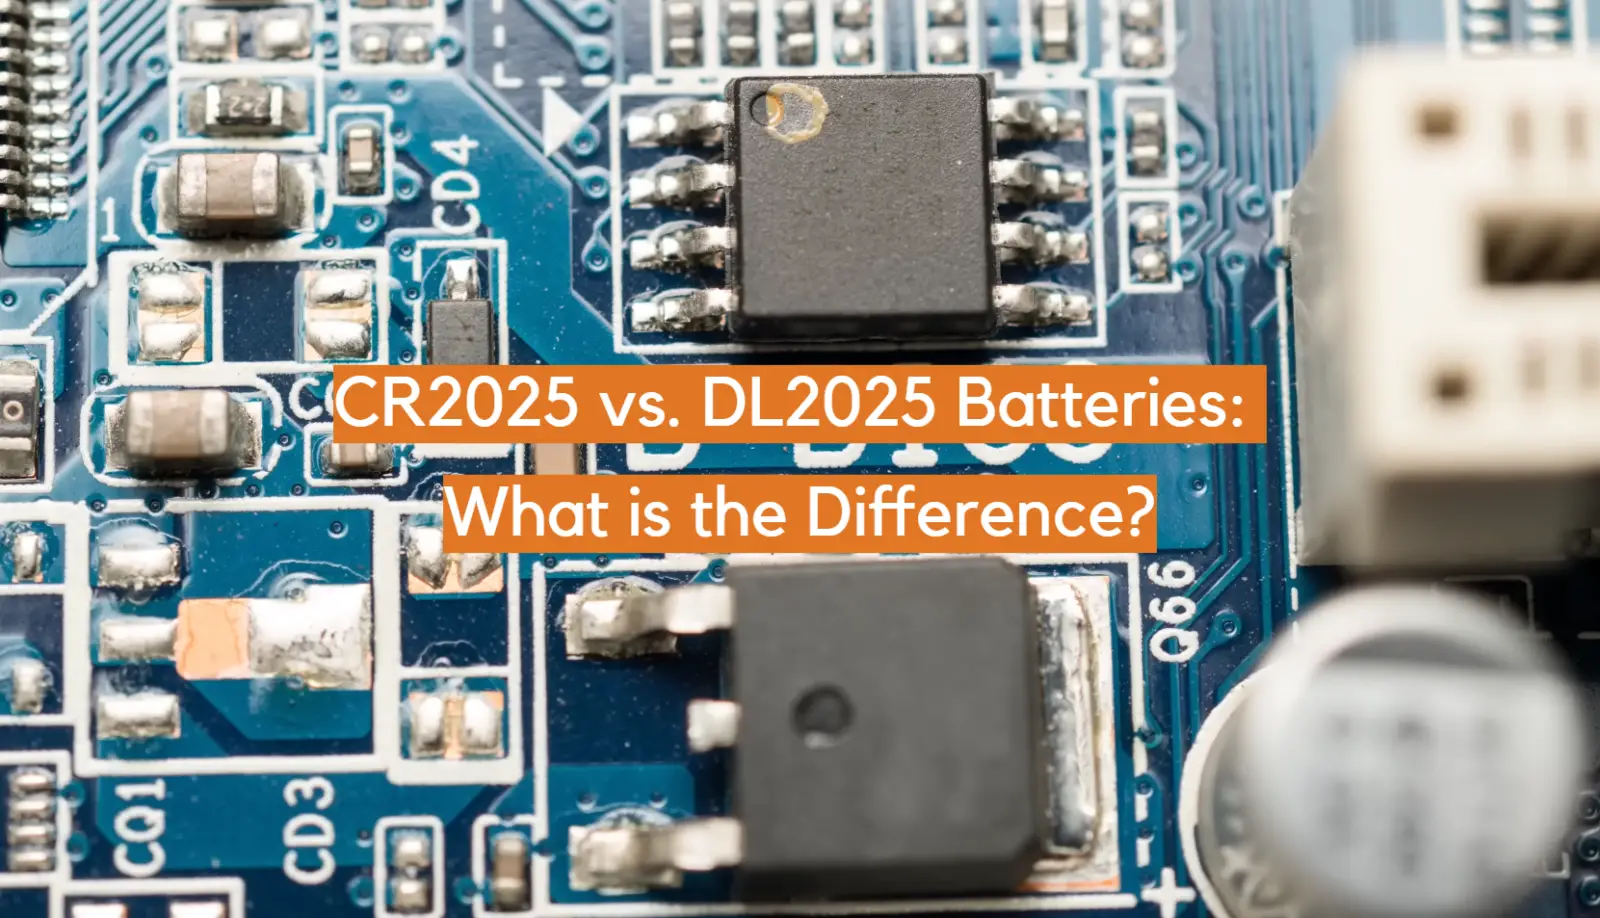 CR2025 vs. DL2025 Batteries: What is the Difference?